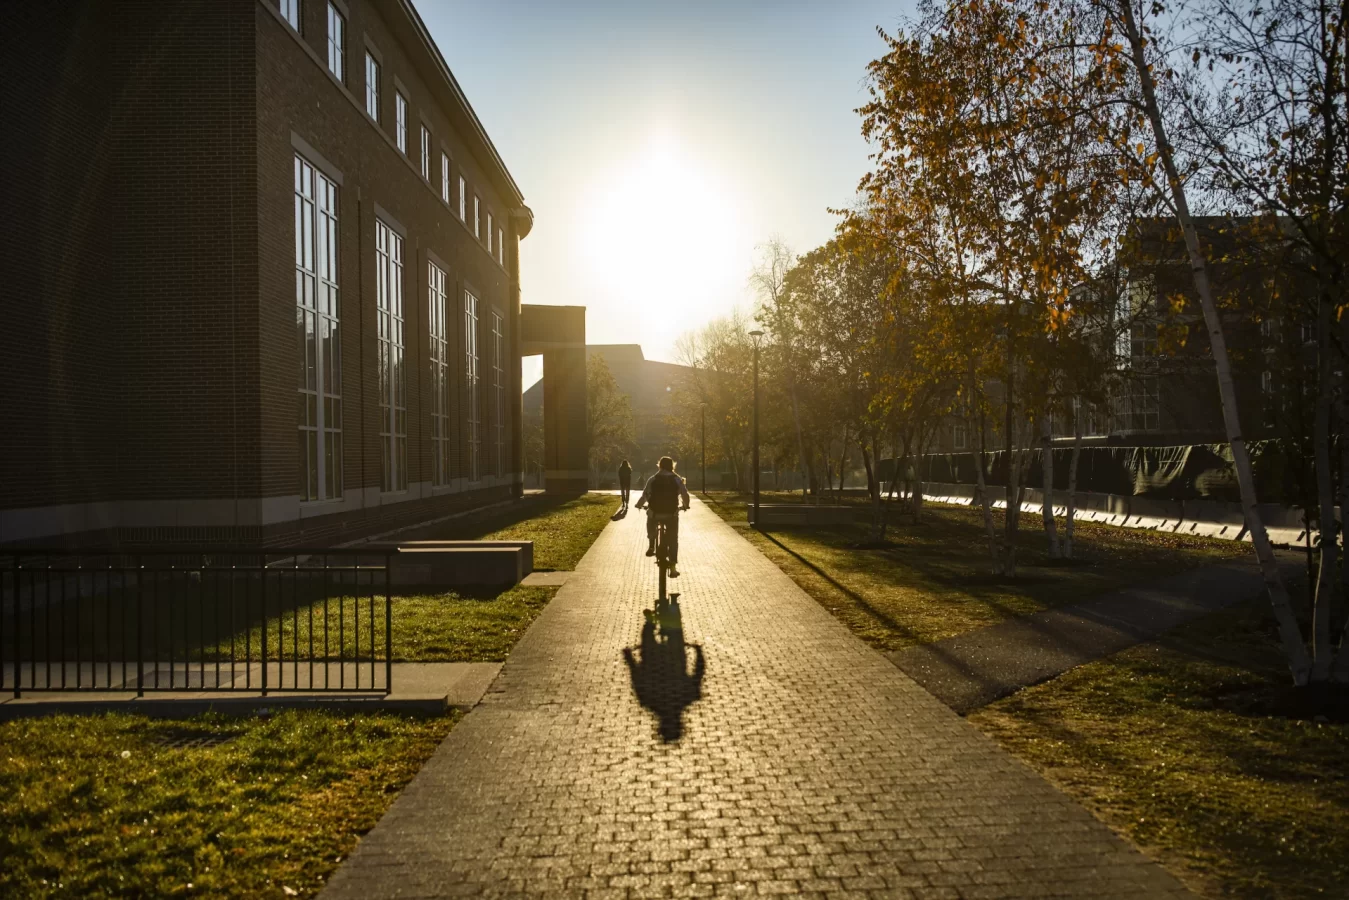 Scenes from early morning campus on Nov. 9, 2021.


The sun silhouettes students on Alumni Walk early this morning.